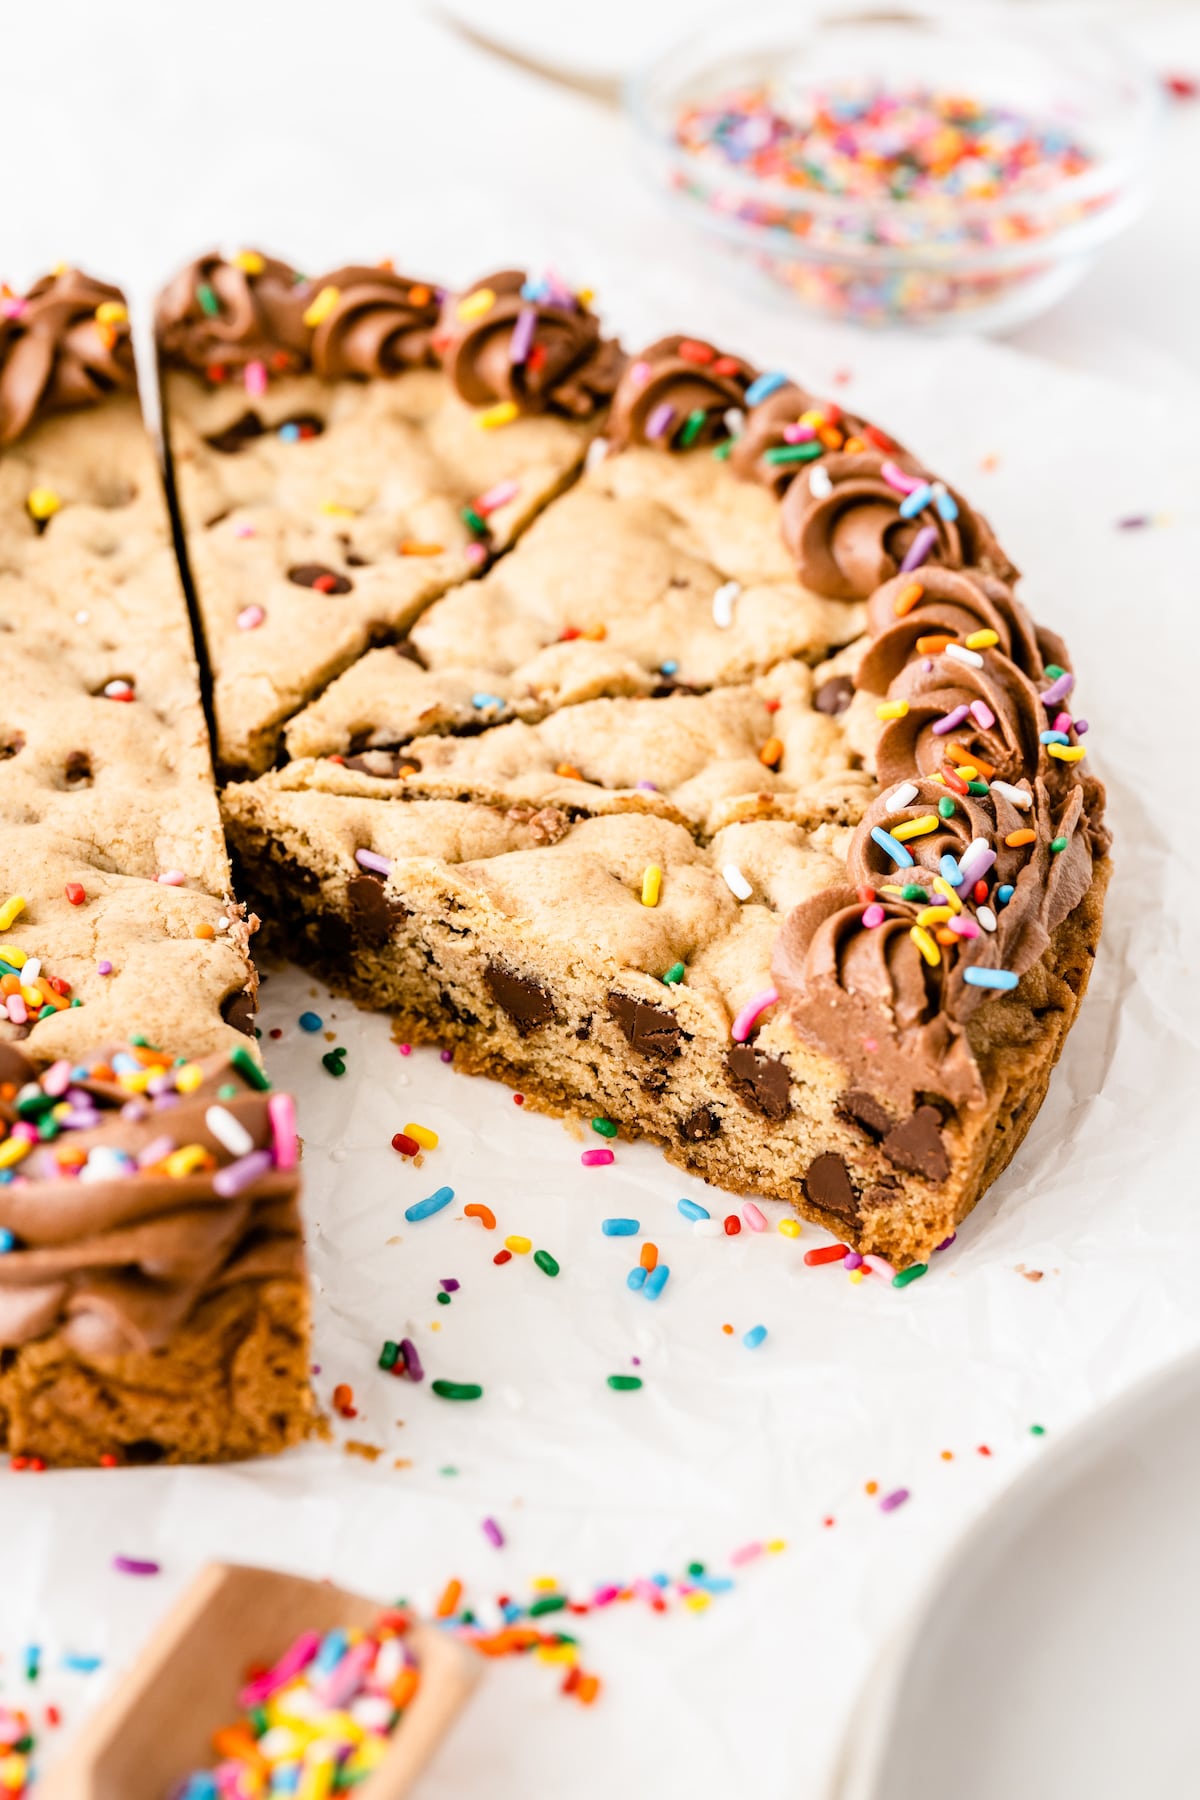 Cookie cake cut into slices with one slice missing